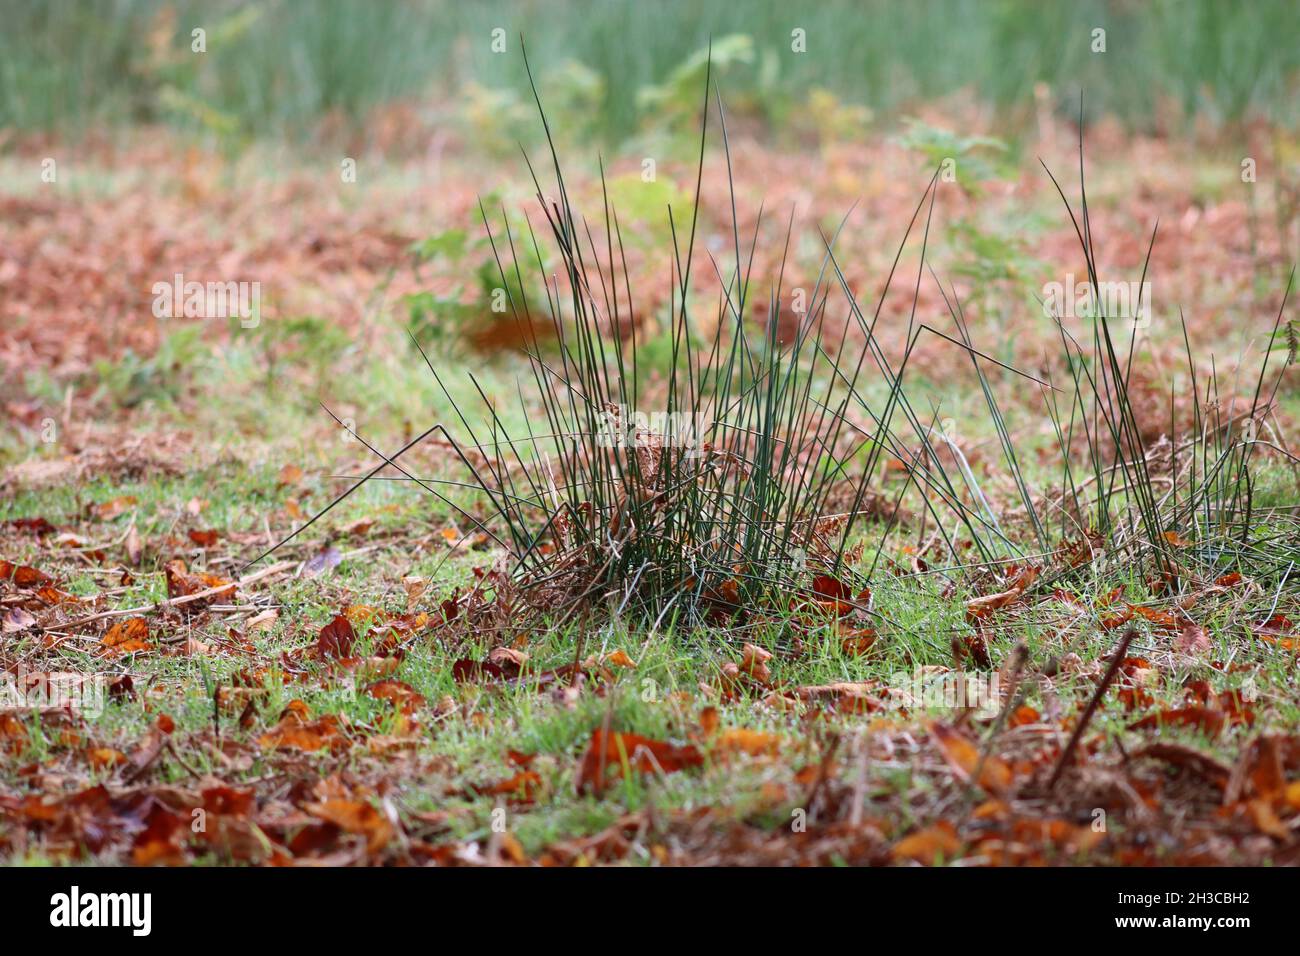 Tuft of sedge grass and brown leaves in autumn scene Stock Photo